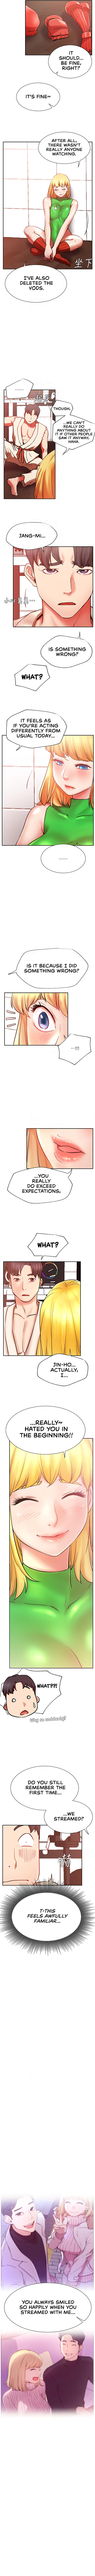 do-you-want-to-collab-chap-31-2